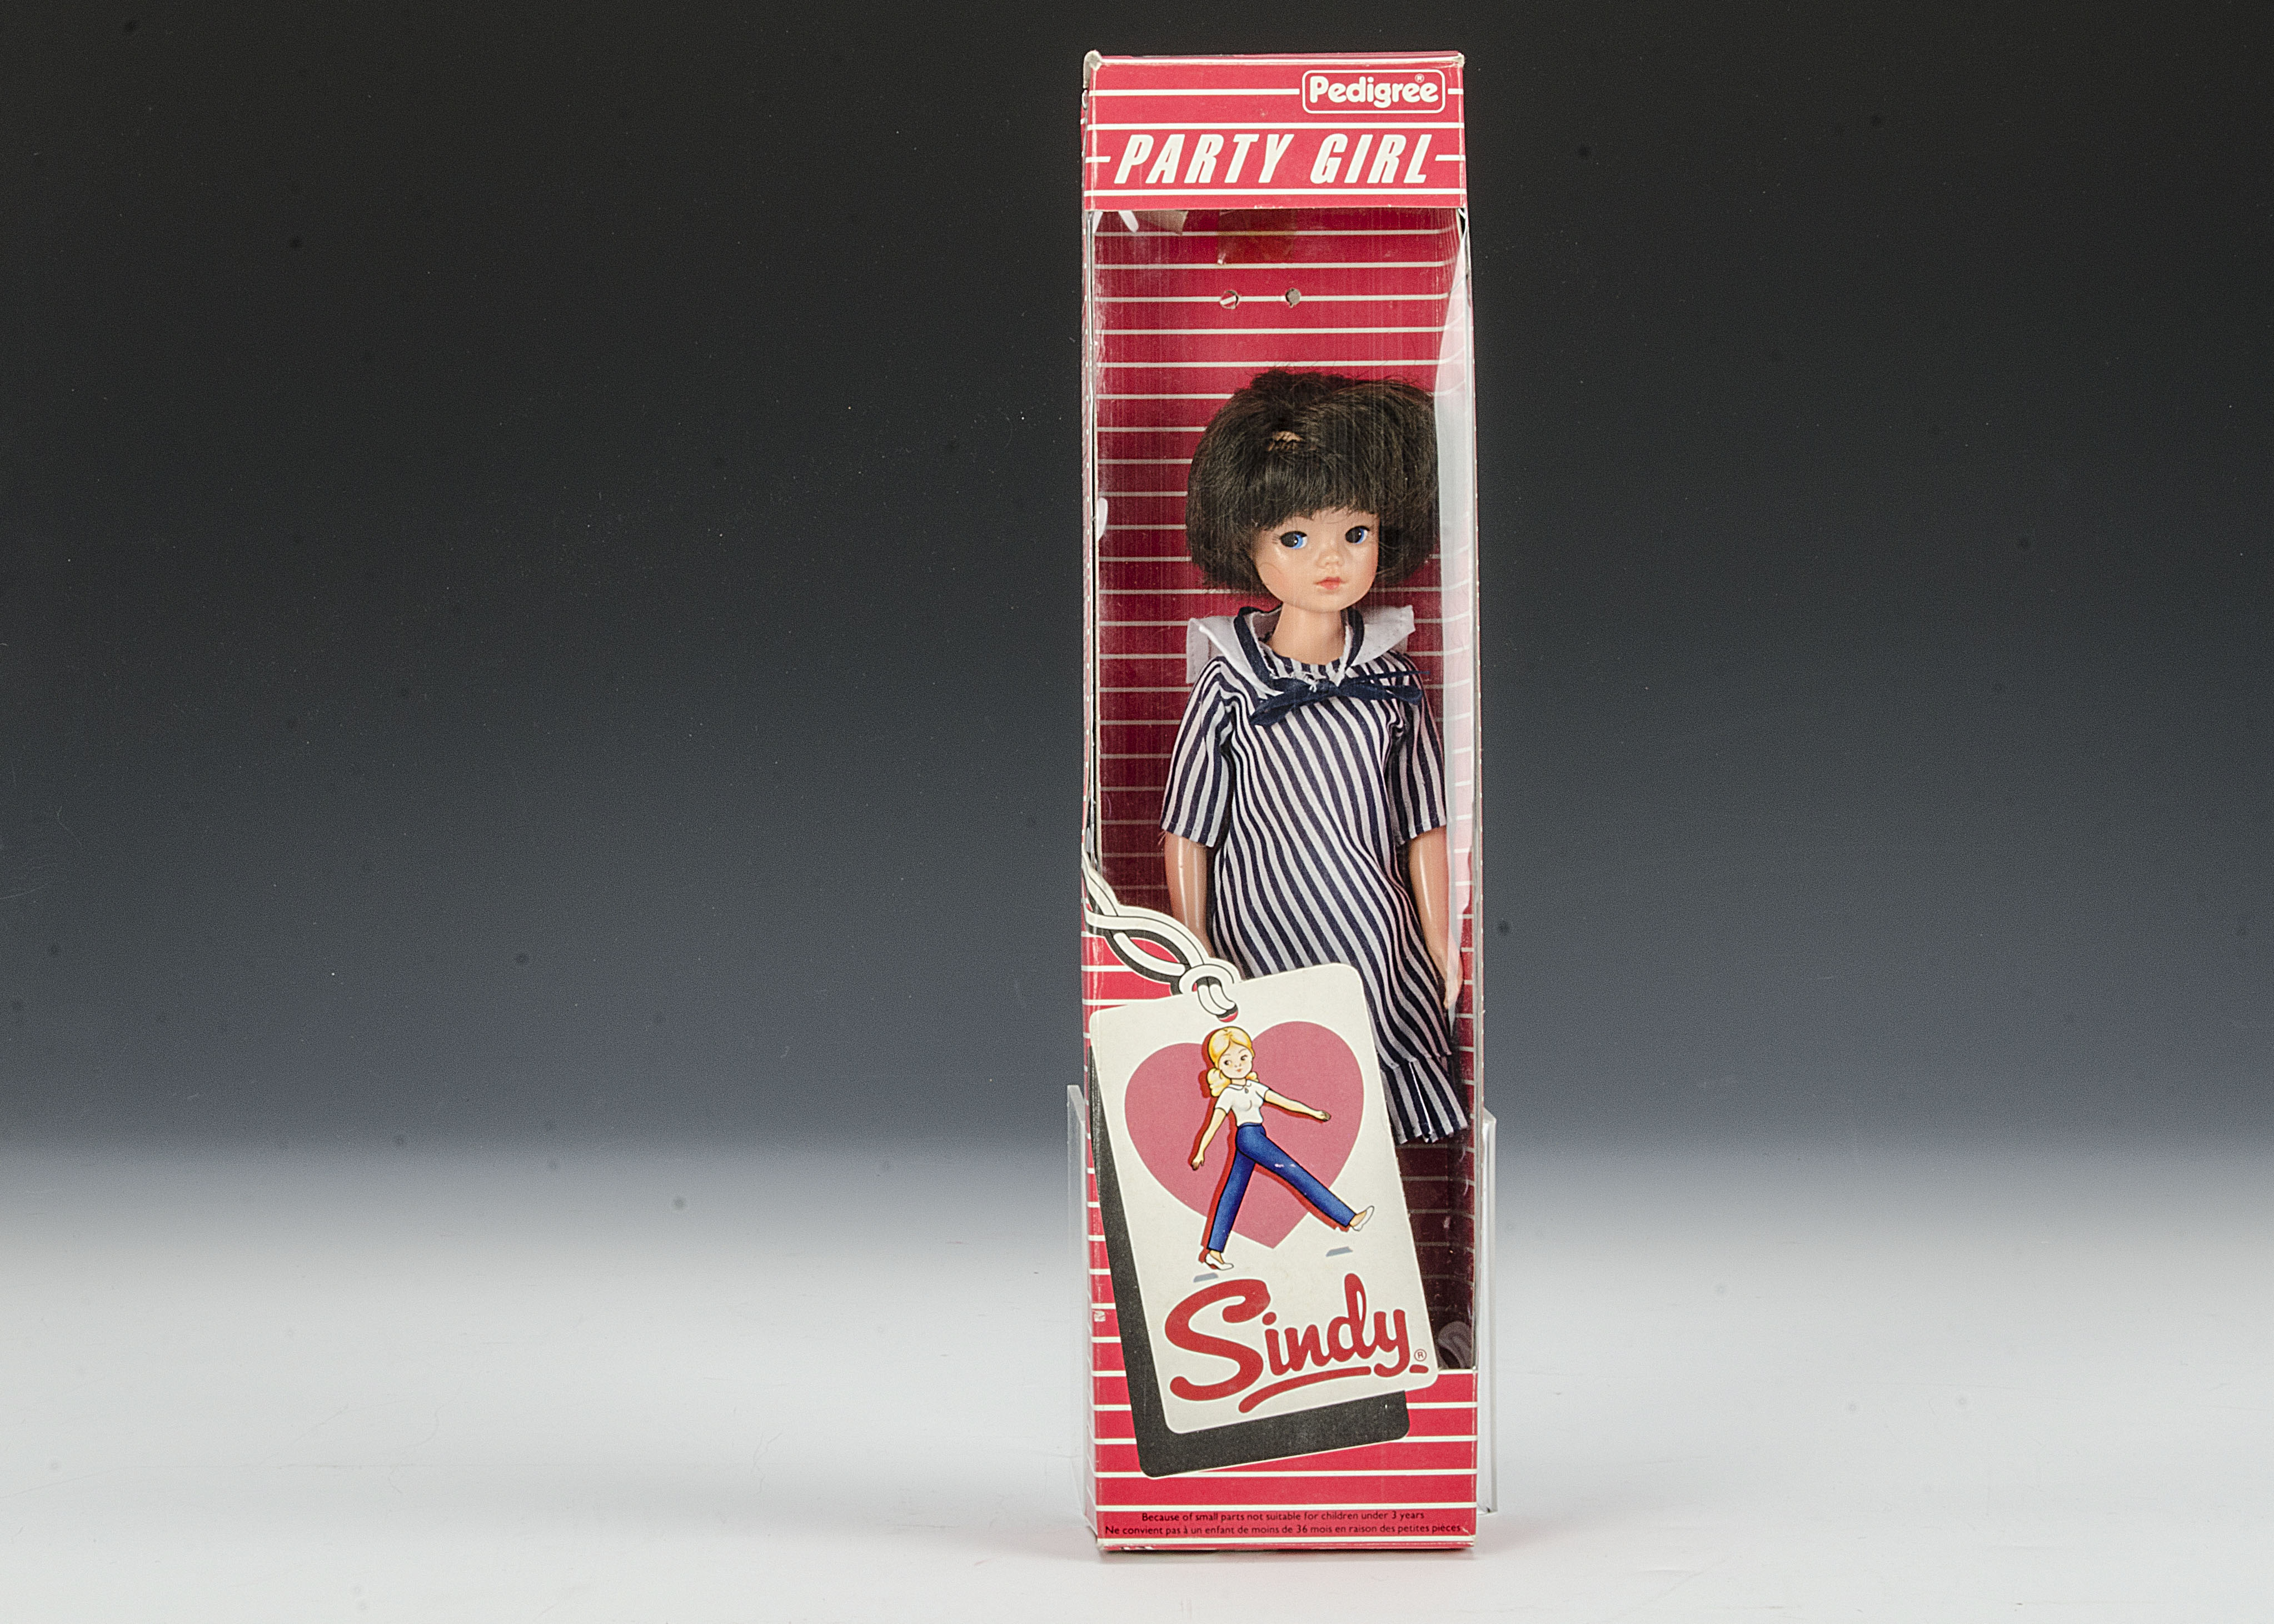 A Pedigree Party Girl Sindy, No.44762, 1983, with short brunette hair, black and white striped